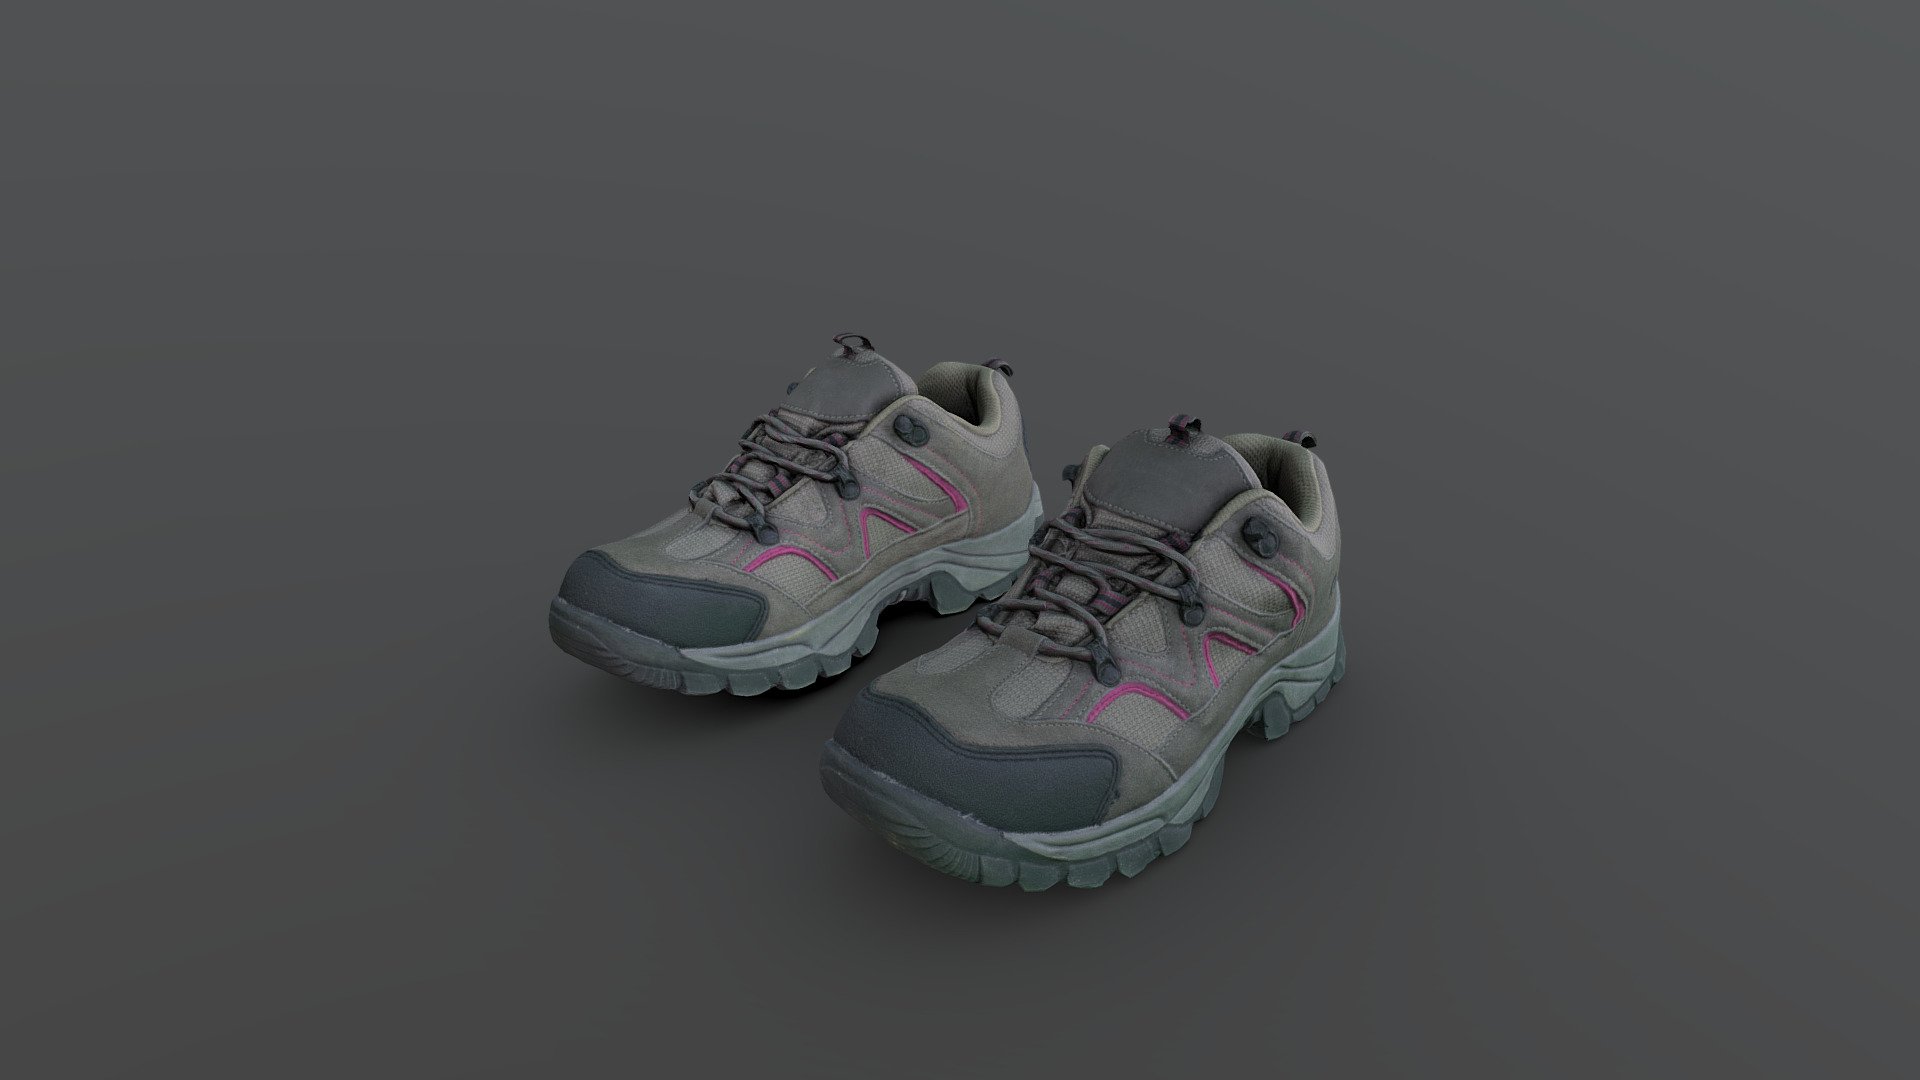 Pair of Shoes 3D model lowpoly

Right and Left included, as separated mashes.

Quad topology

Polygon count: 8313 Vertices count: 8313 (per shoe)

Texture map: 81928192 Normal map: 81928192 Occlusion map: 4096*4096

I have created all maps from high poly mesh with polygons that can be used on low poly mesh. Models are usable for games, VR/AR. Contains only quads, and available in multiple formats obj, ma, fbx and ztl (4R8).

Zbrush file contains mesh with multiple subdivisions 3d model